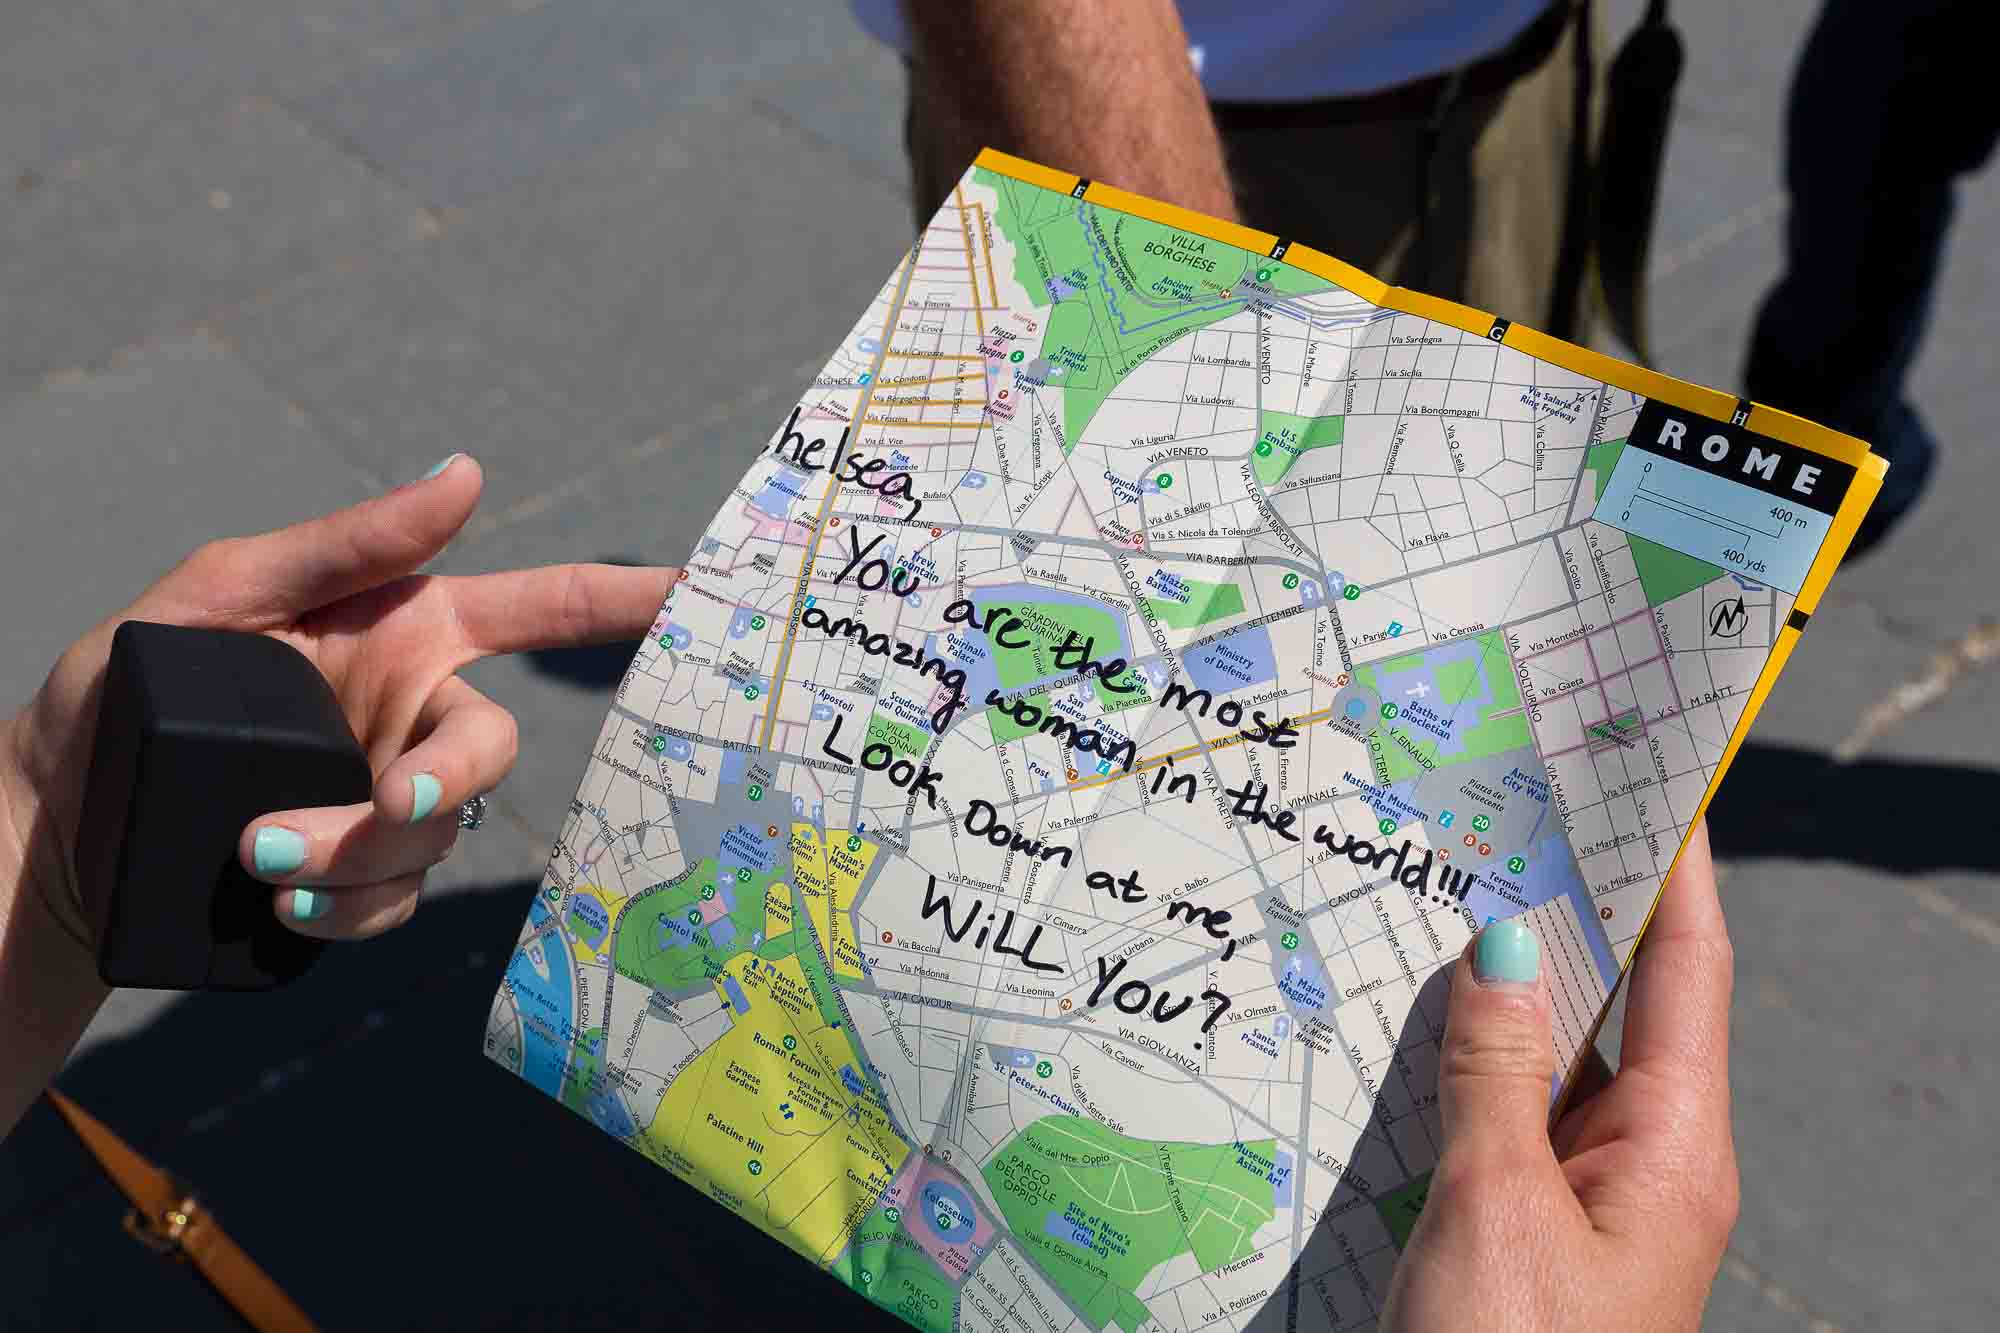 The wedding proposal message written on a map